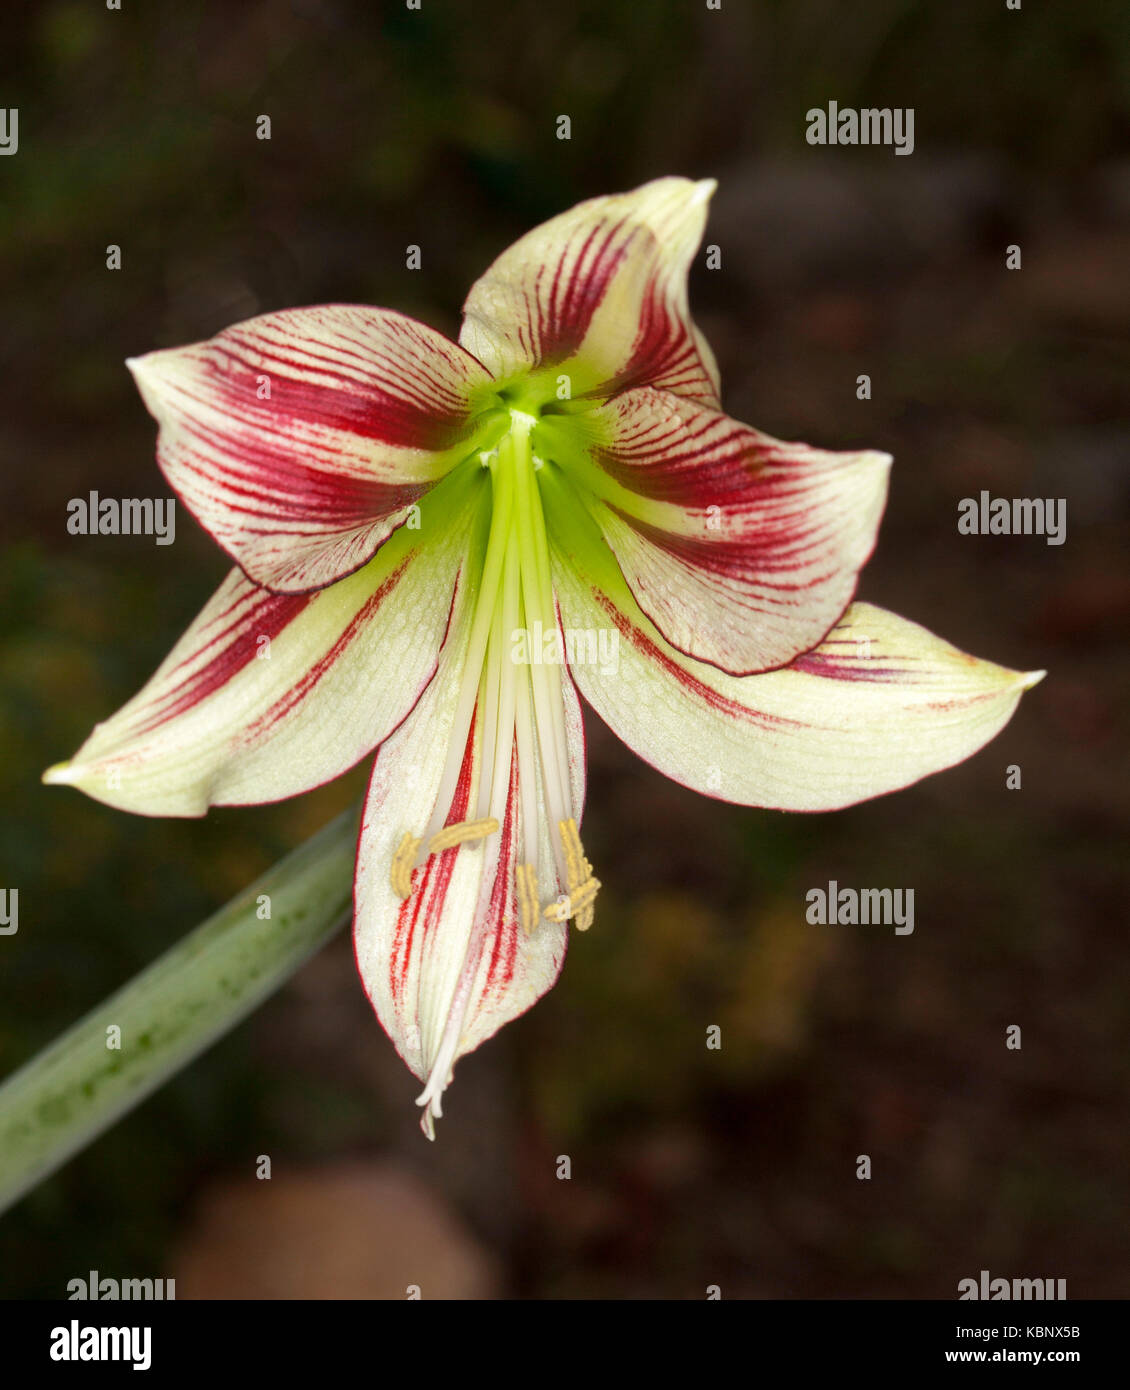 Beautiful cream / white and red striped flower with green throat of Hippeastrum papilio against dark background Stock Photo